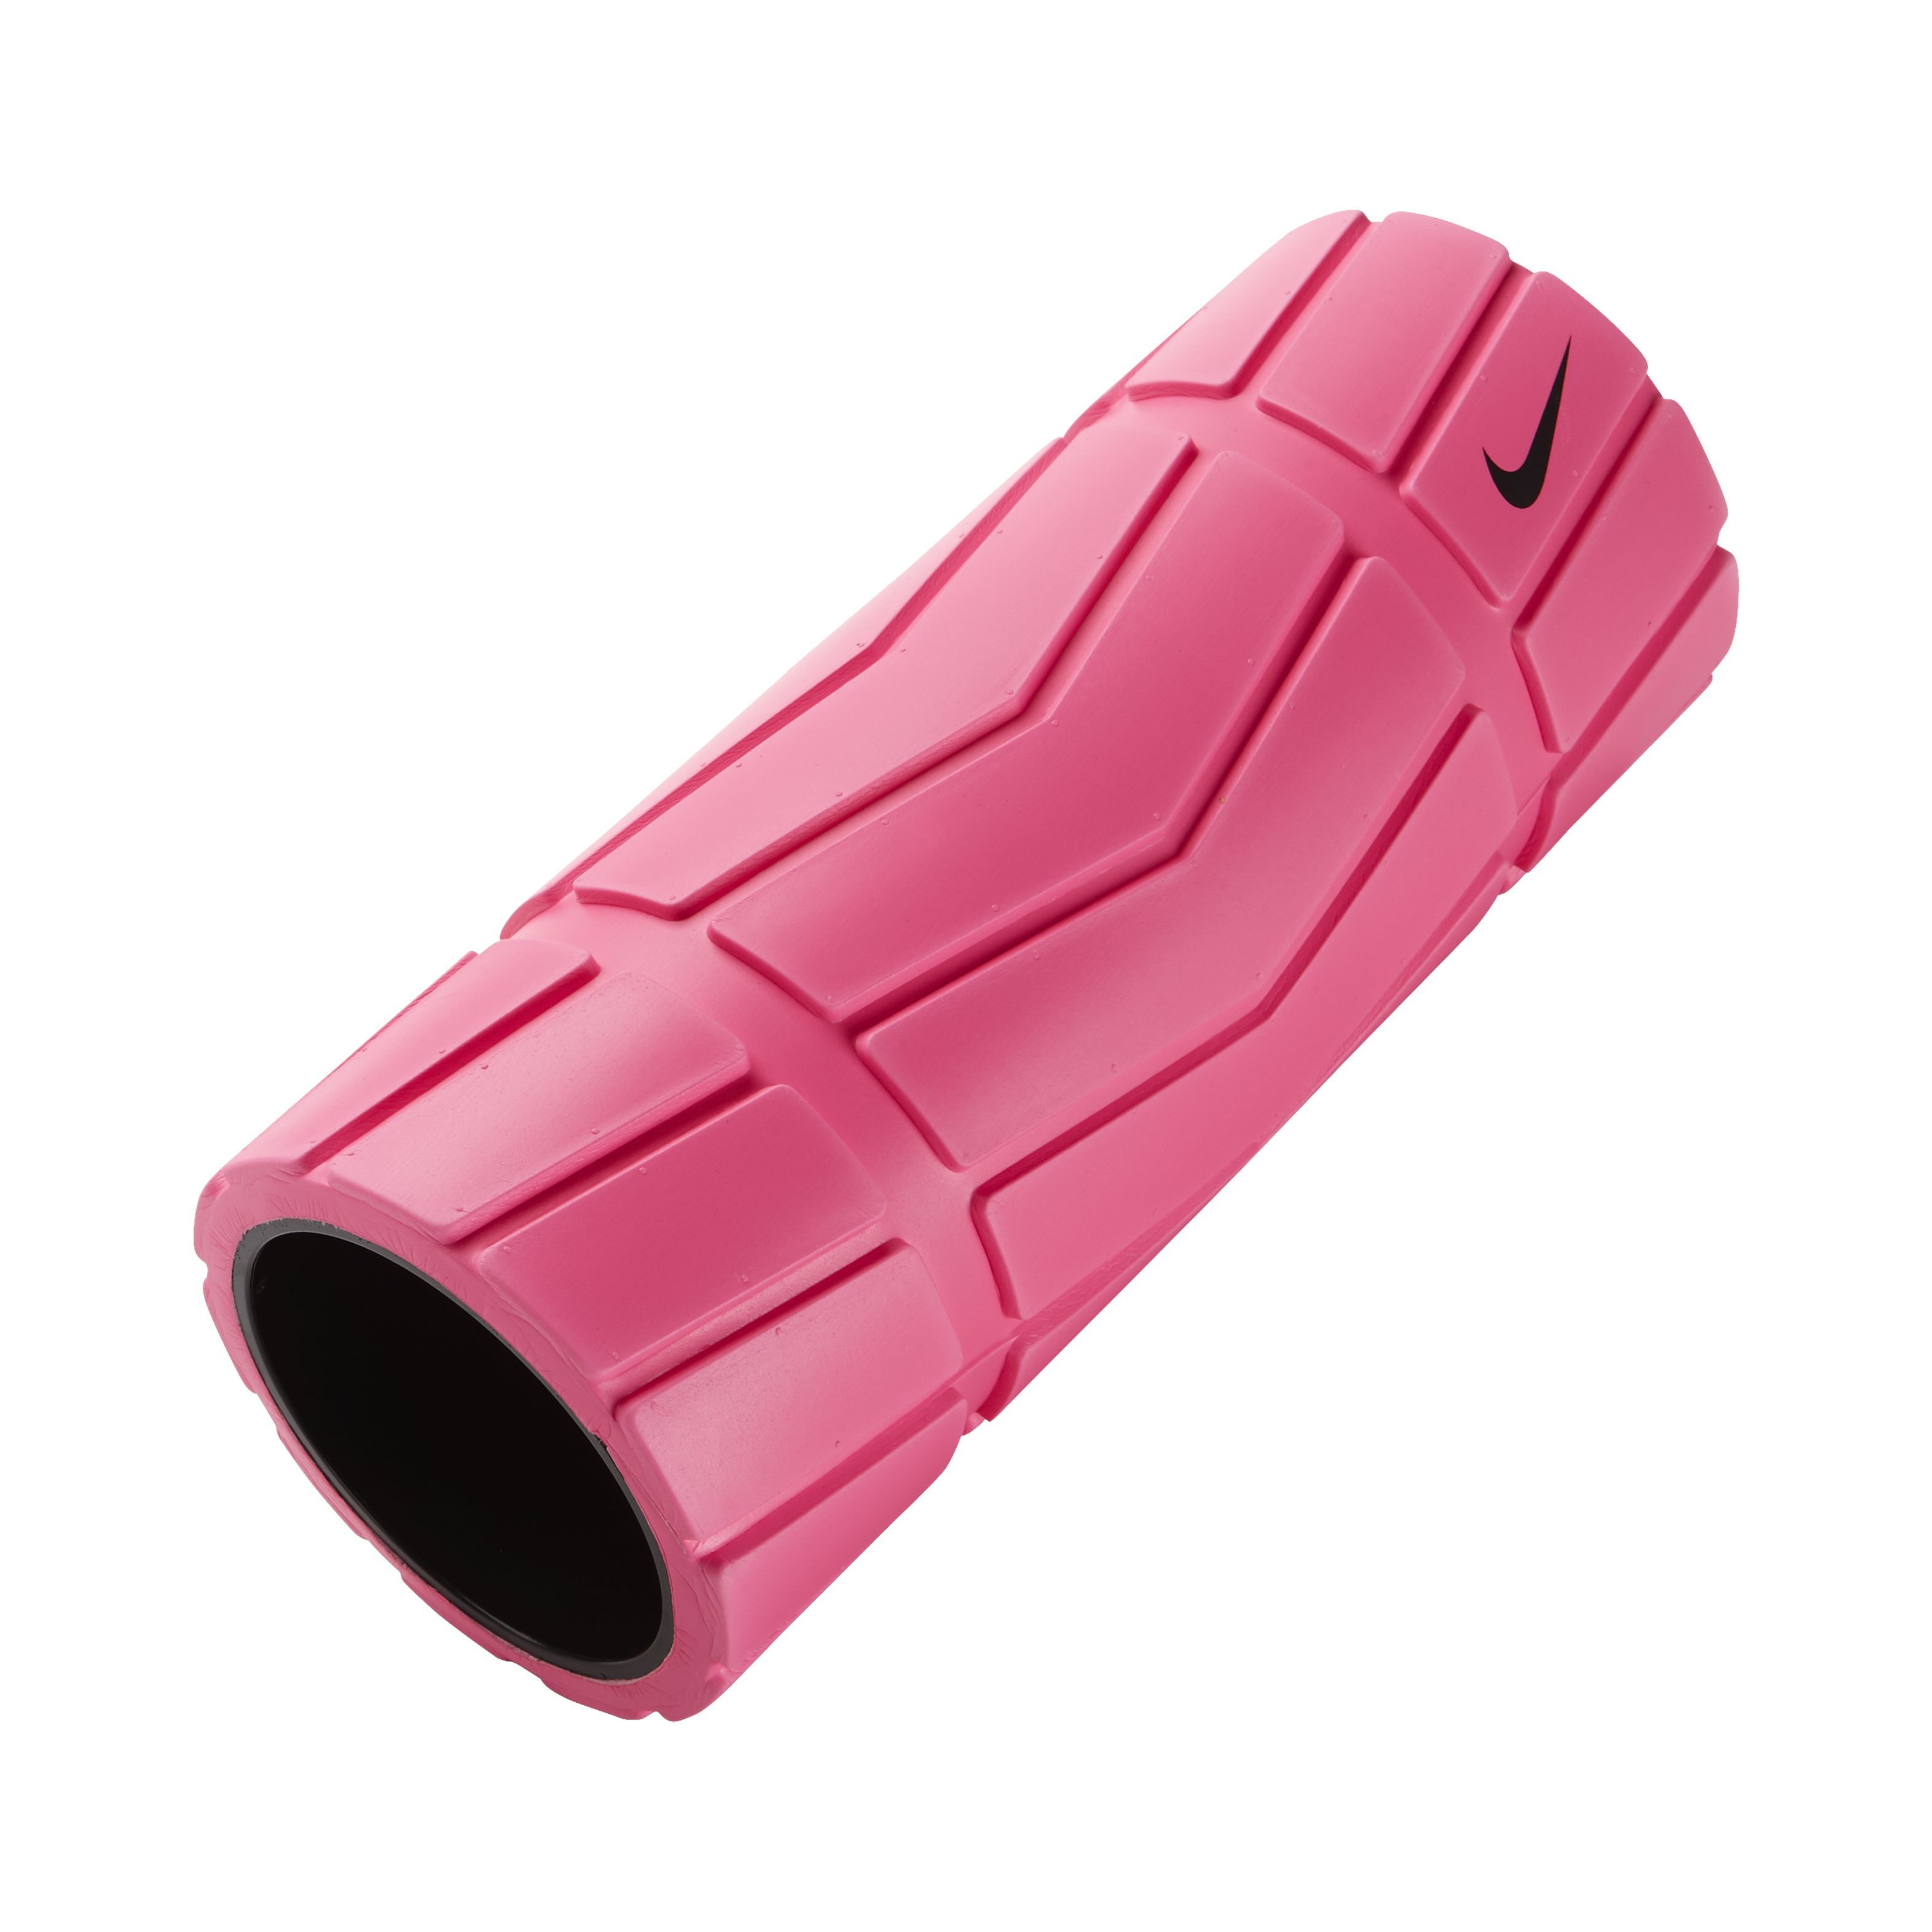 nike recovery foam roller review